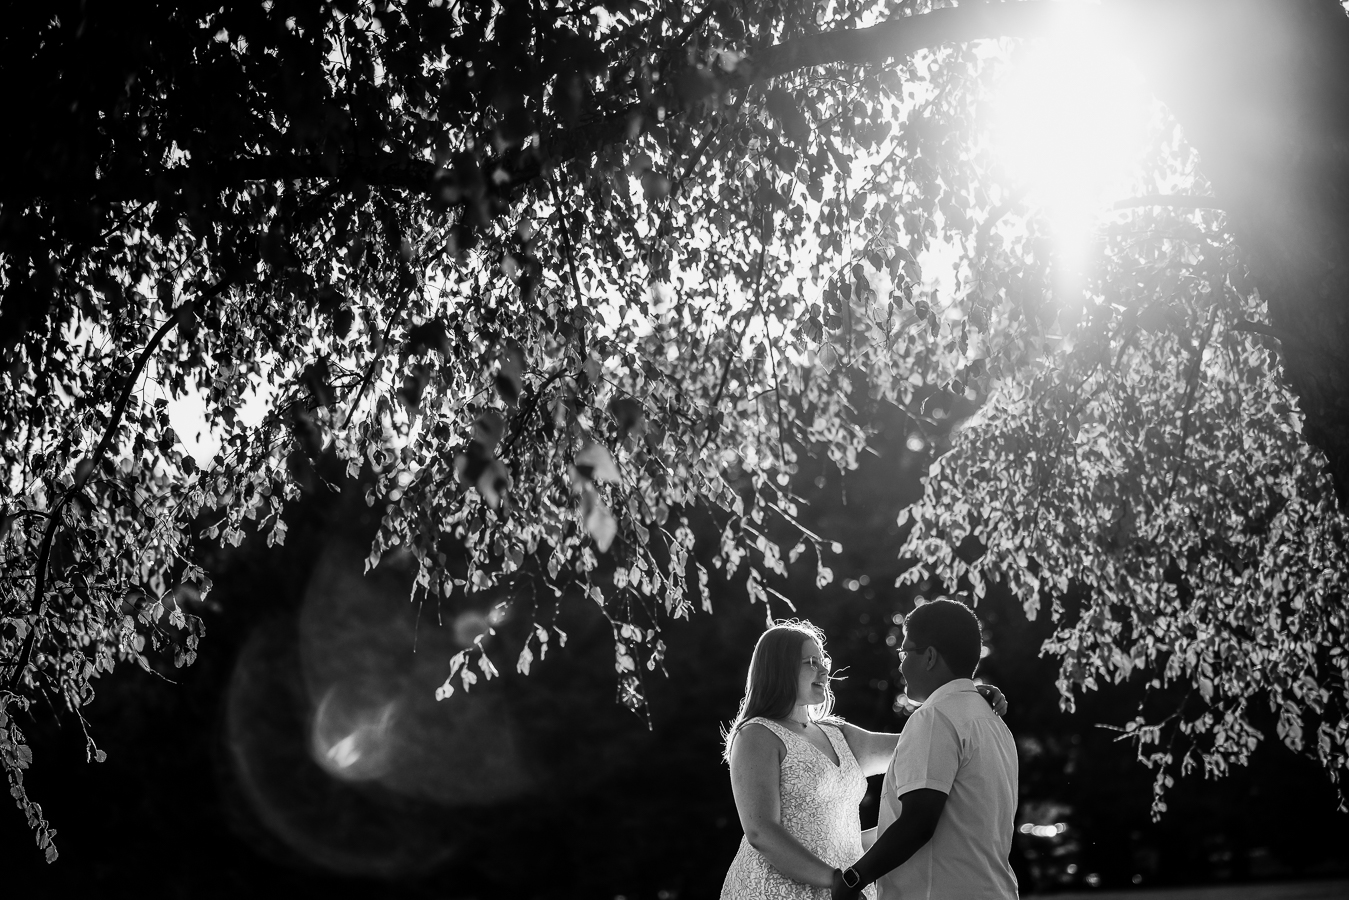 DMV Wedding Photographer, lisa rhinehart, captures this black and white image of the couple during their intimate wedding ceremony in spencerville, Maryland as they hold hands and smile at each other underneath a tree